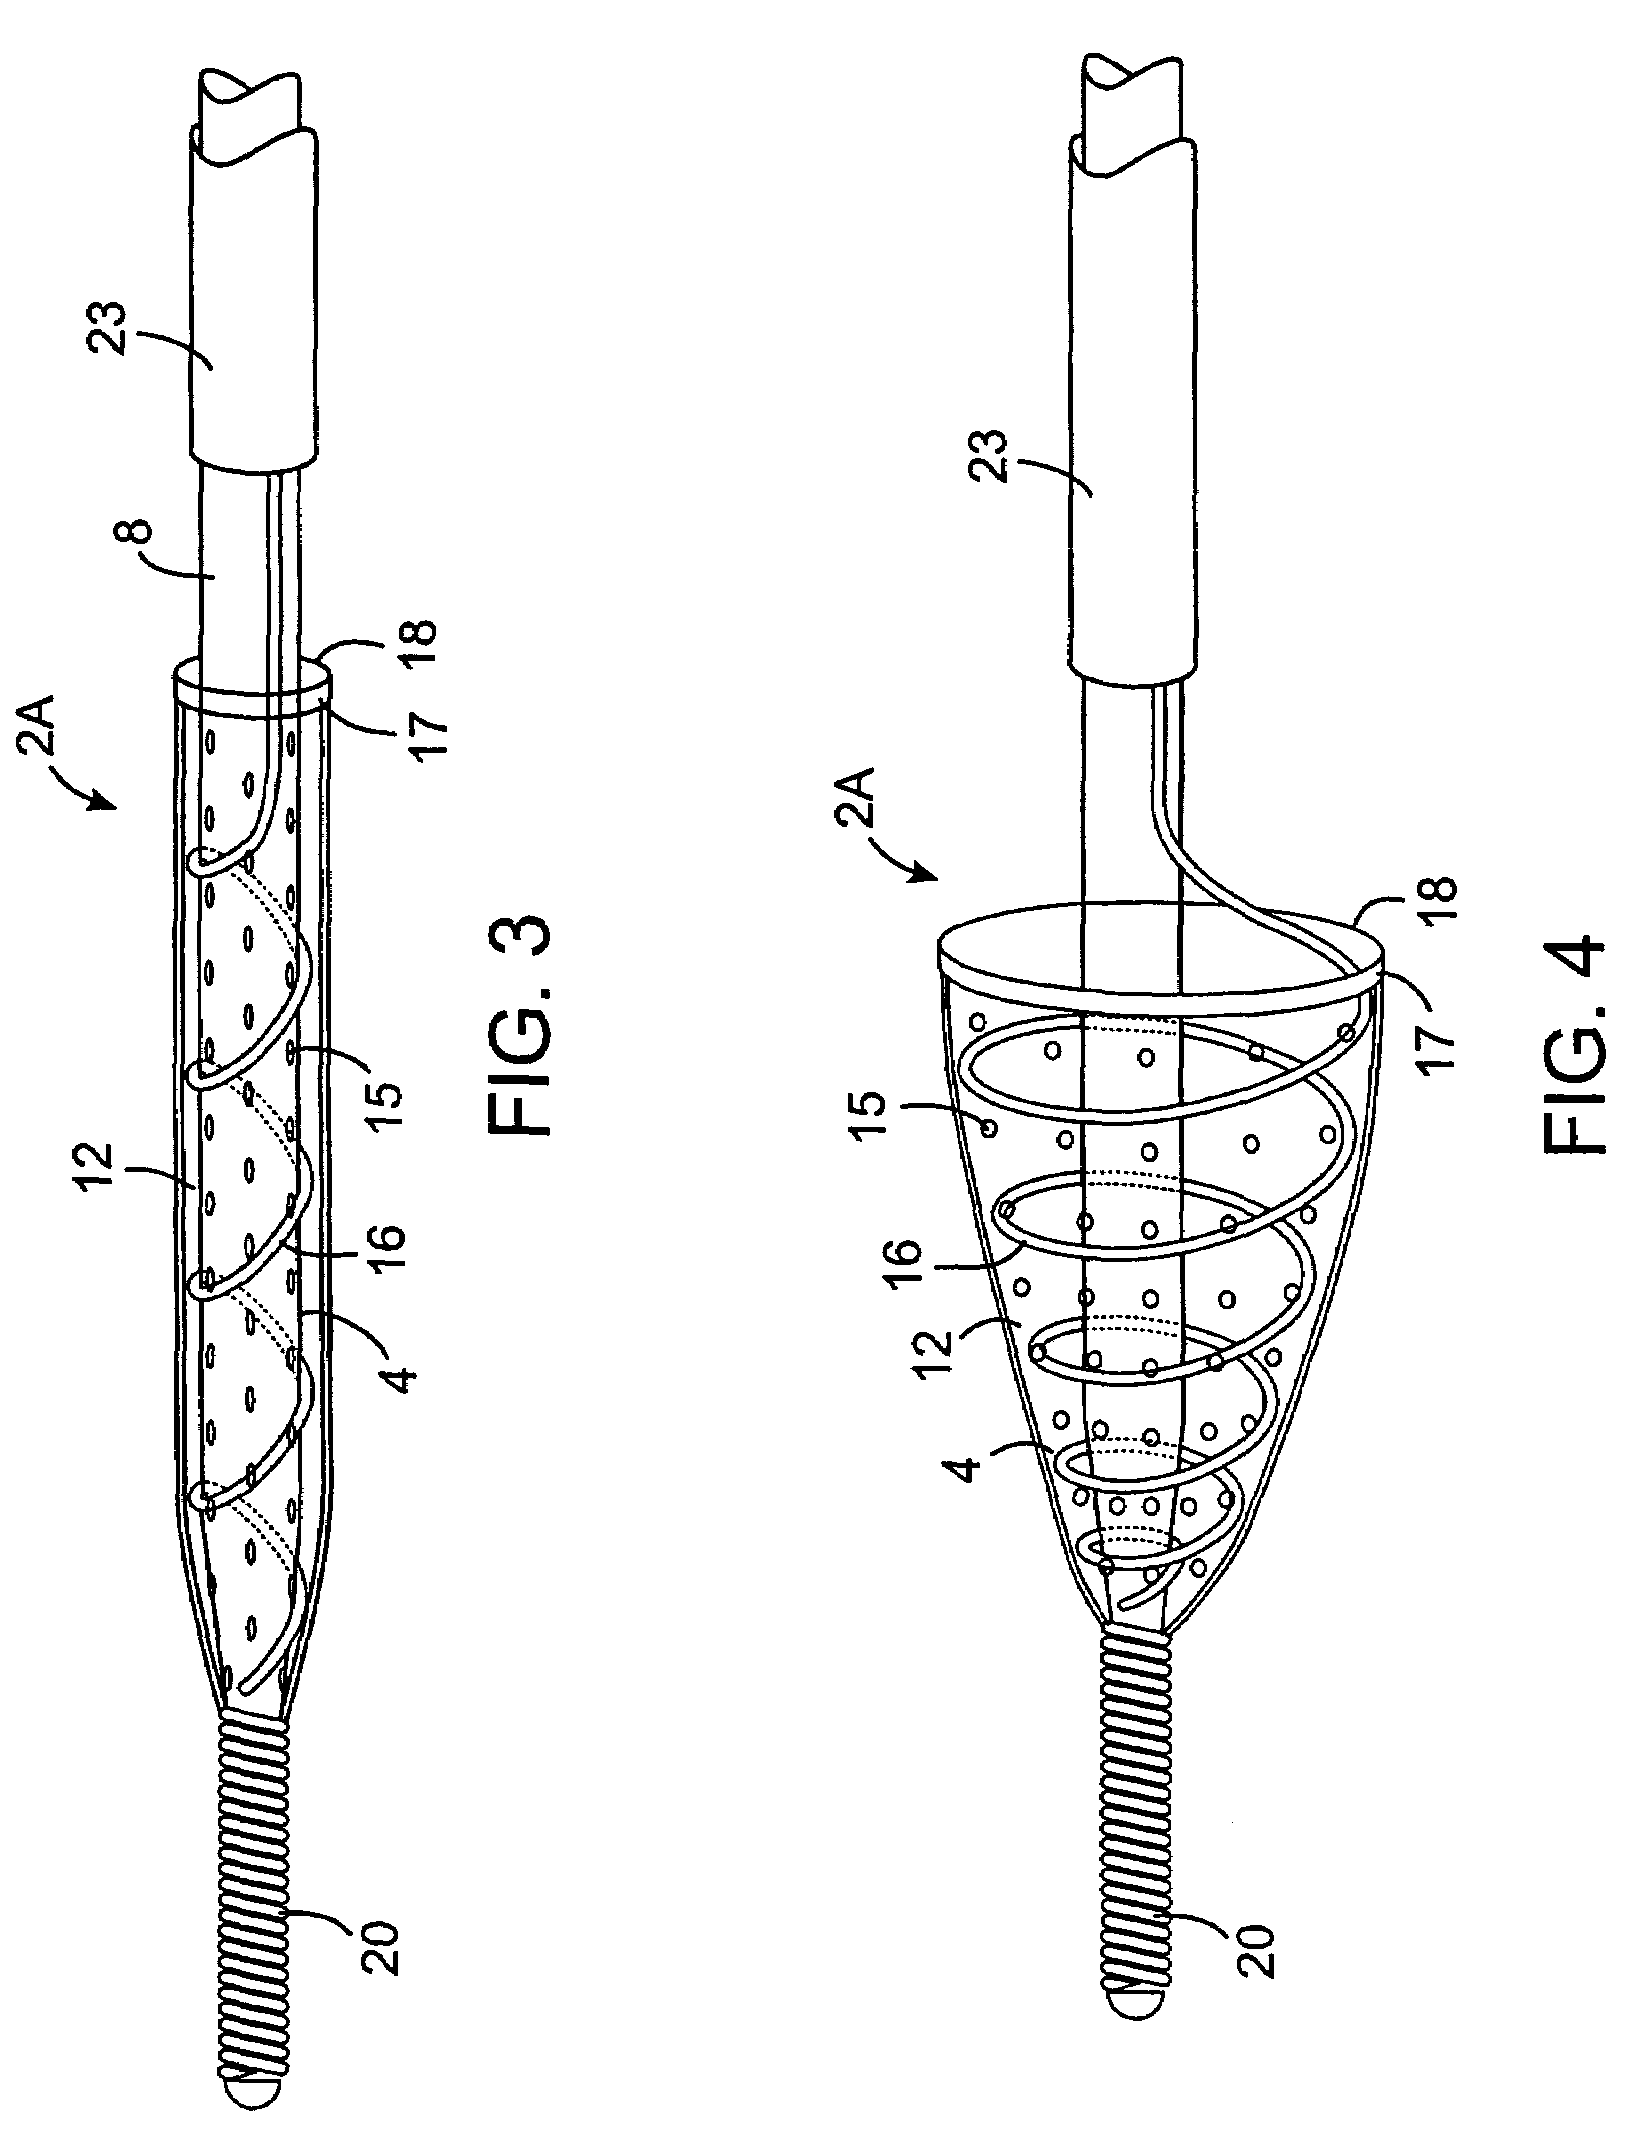 Methods and devices for filtering fluid flow through a body structure